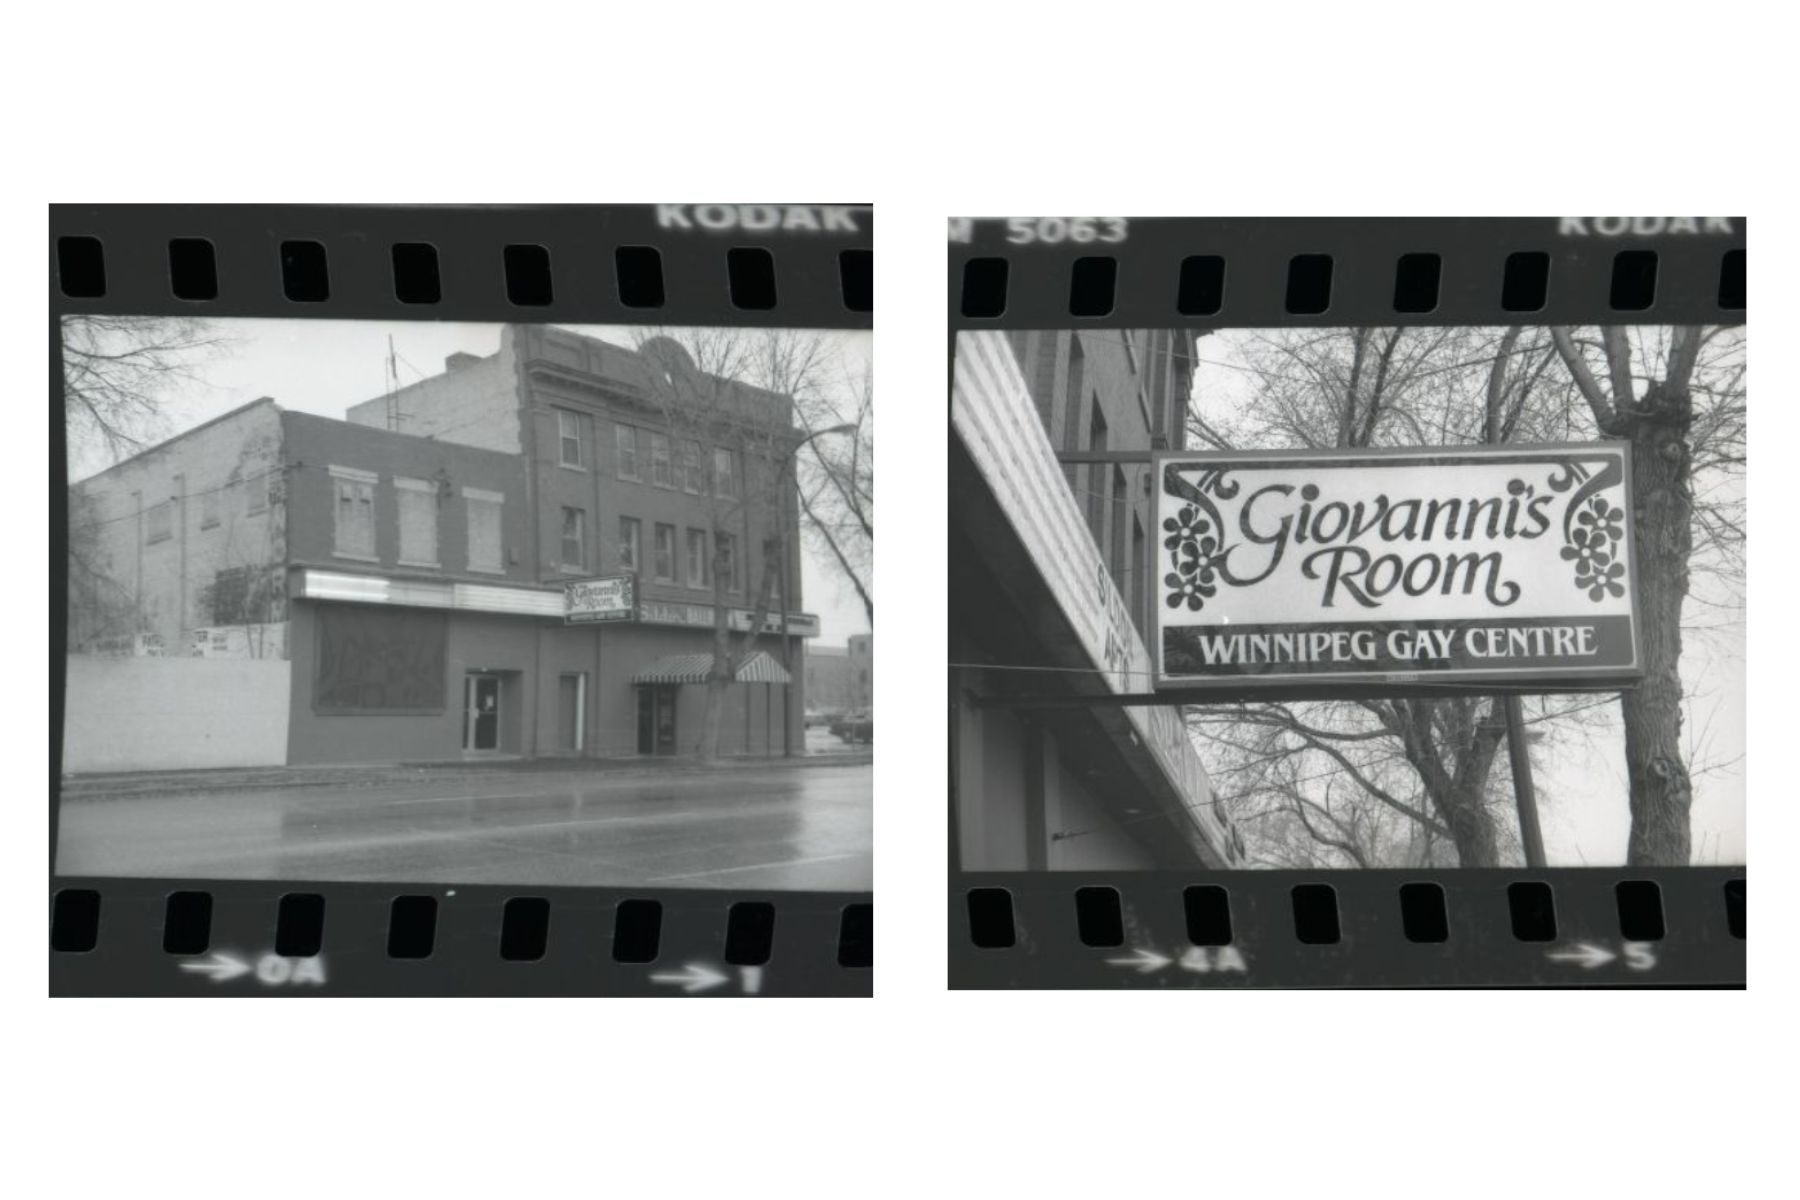 Two black-and-white negatives of the exterior of Giovanni's Room. There is a sign hanging off the side of the building that says "Giovanni's Room, Winnipeg Gay Centre".